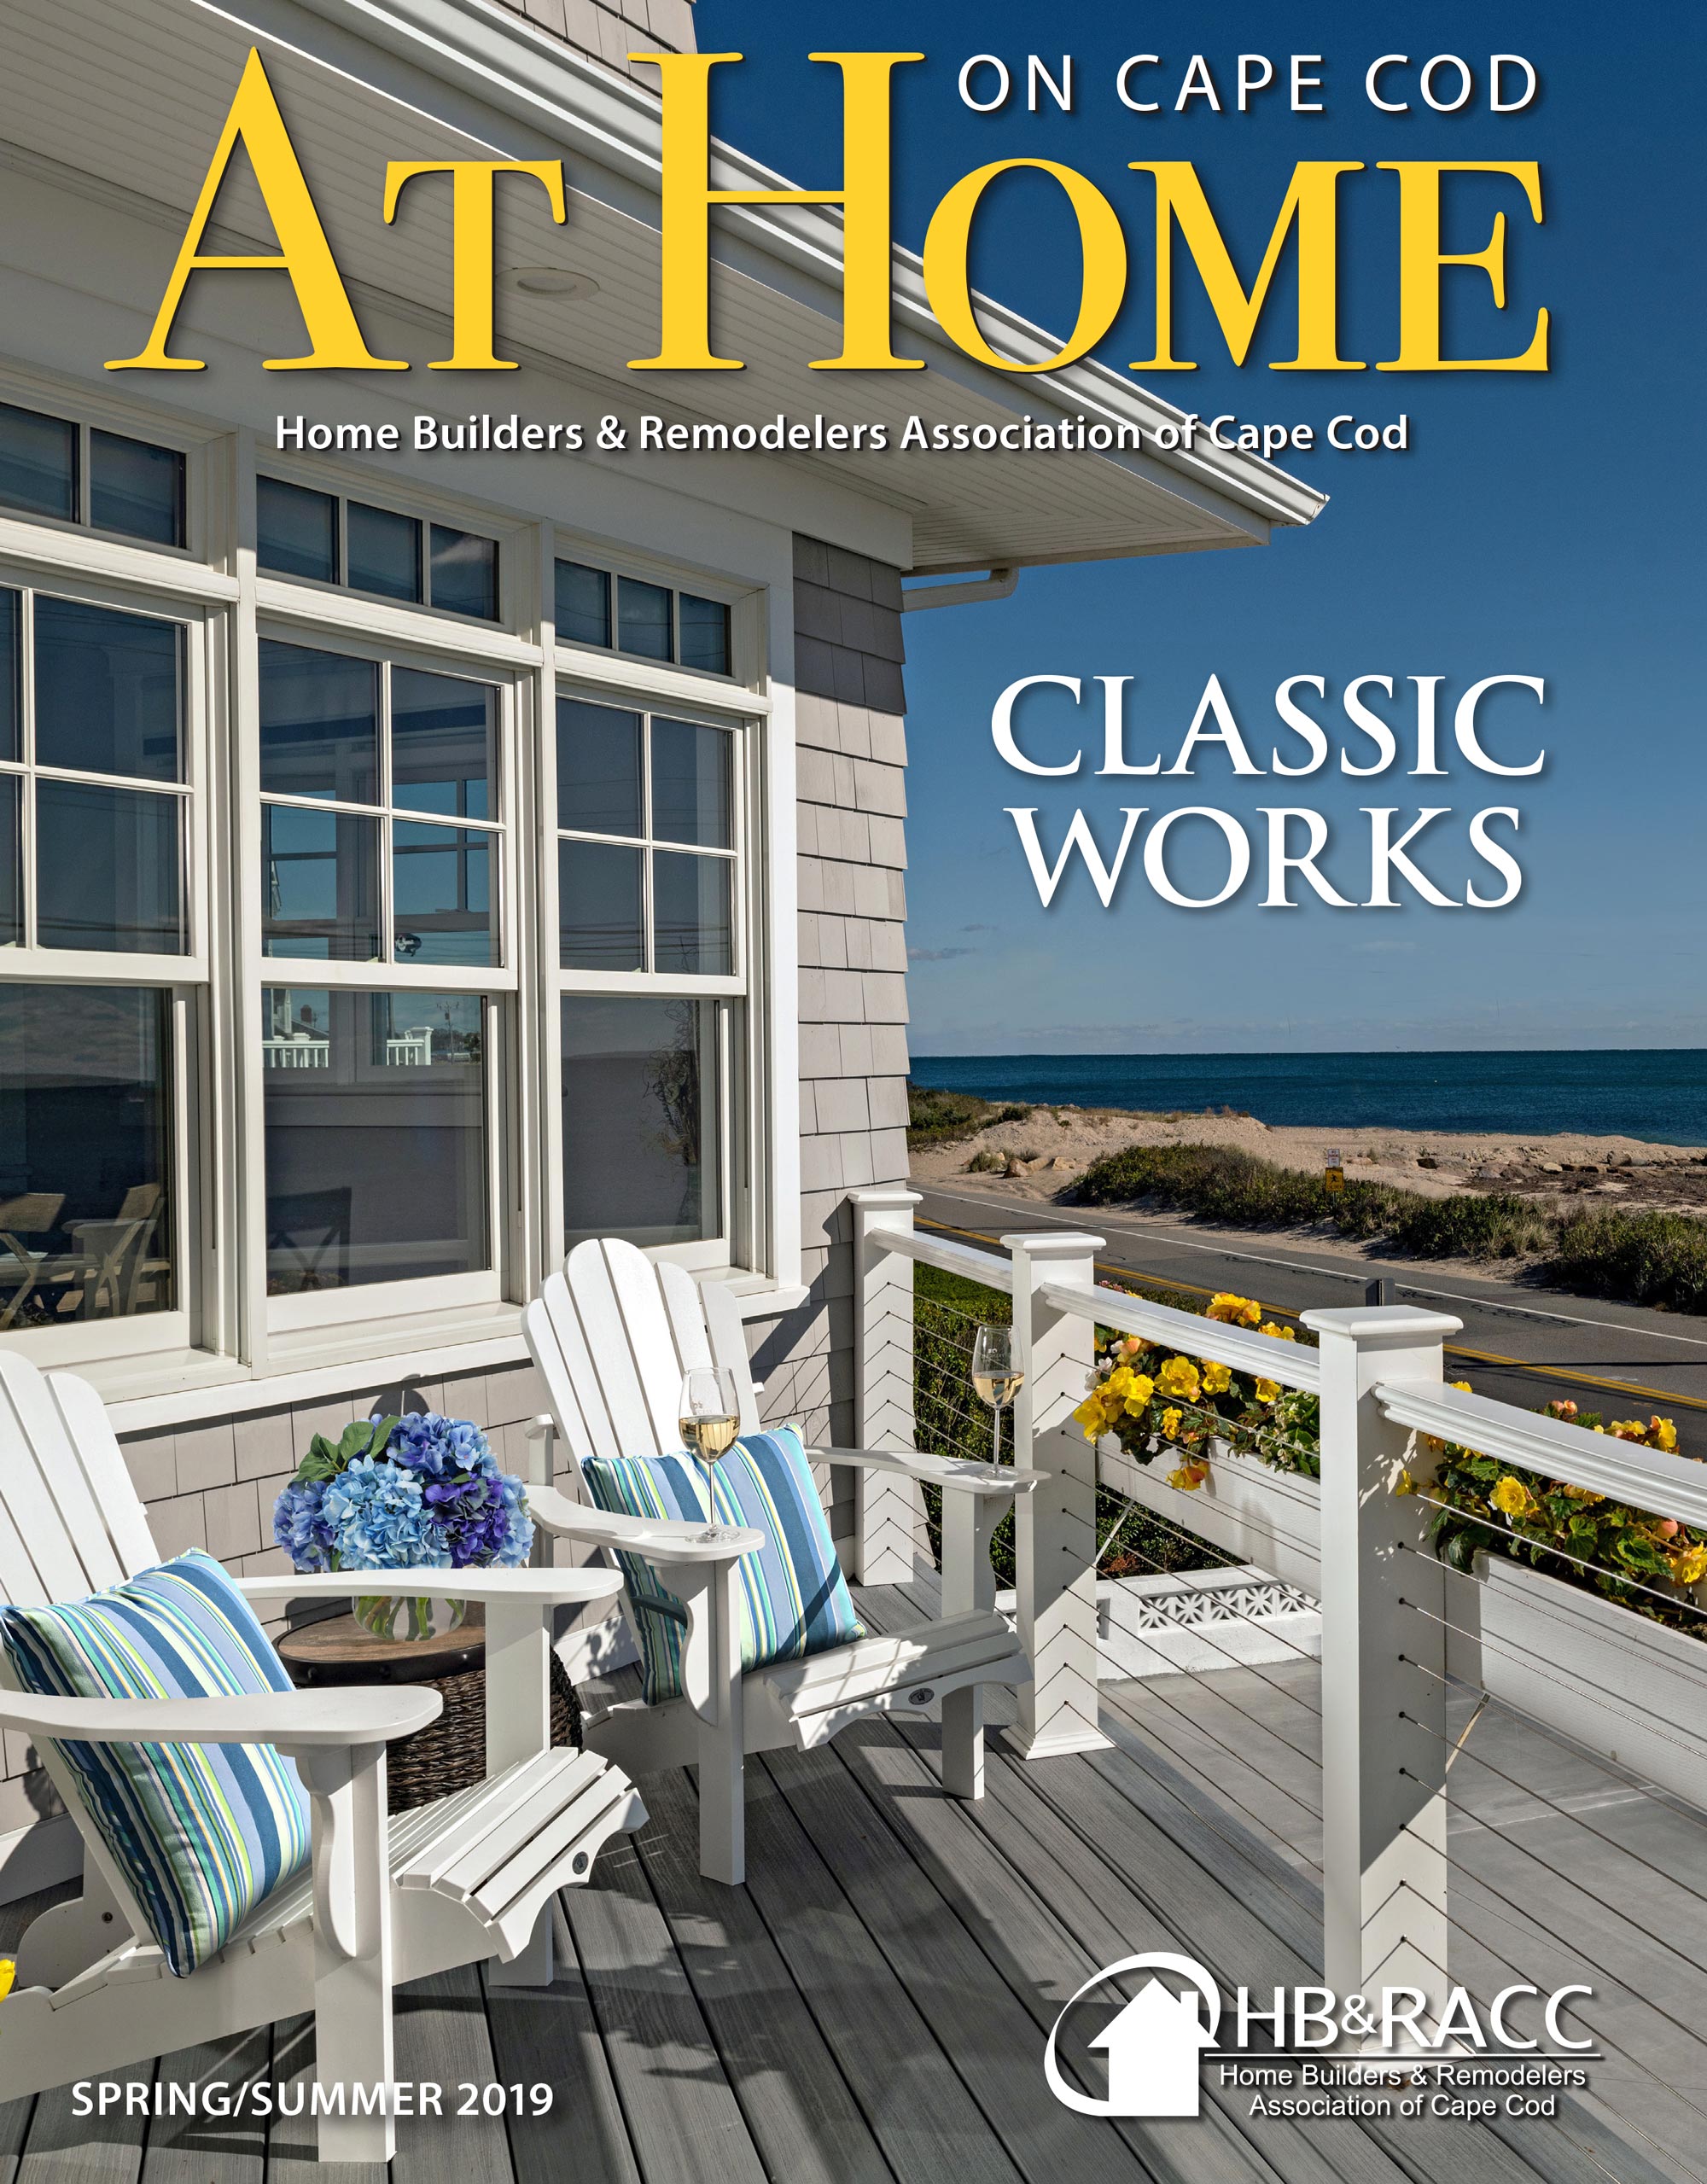 "At Home on Cape Cod" Magazine Home Builders & Remodelers Association